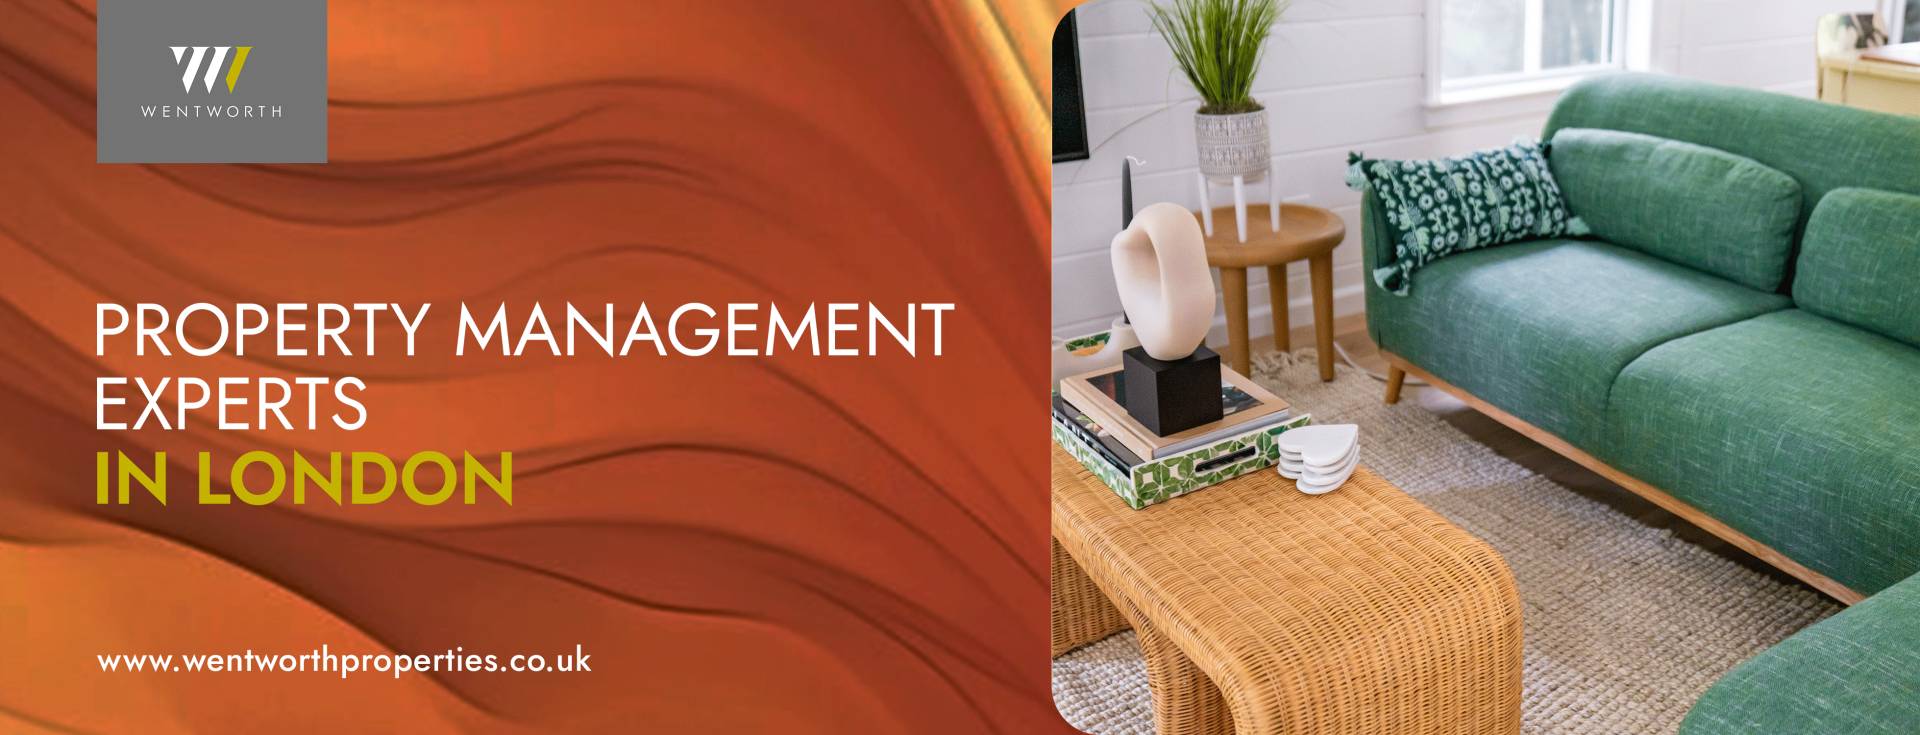 Property Management Experts in London